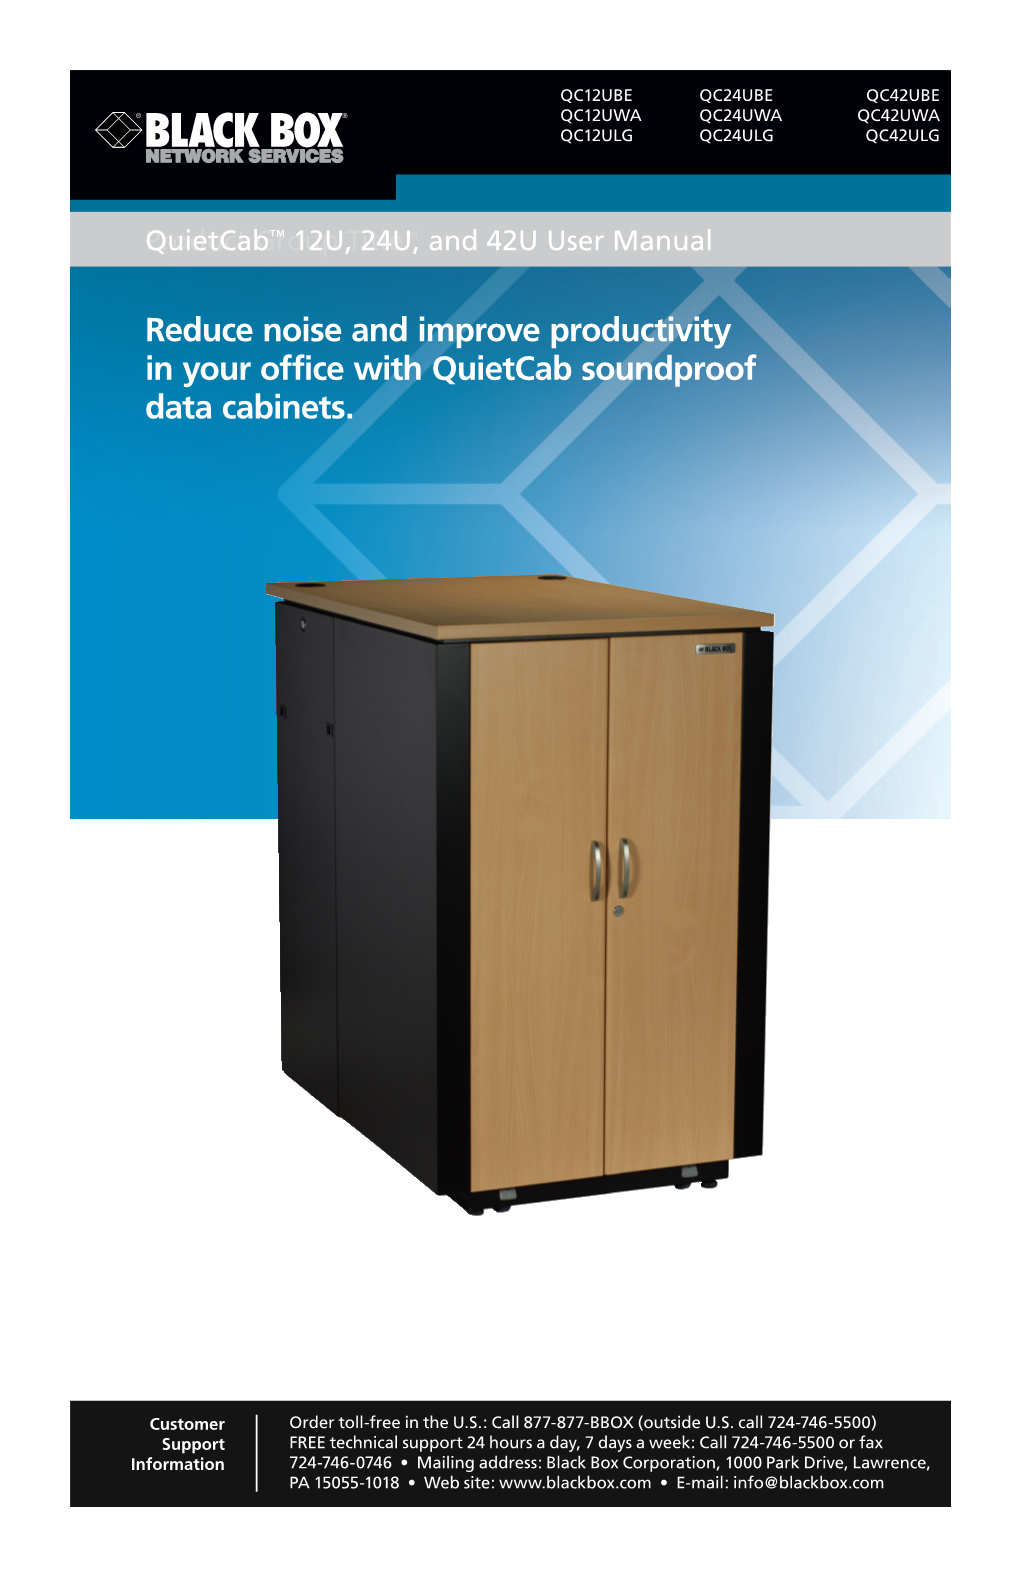 Reduce Noise and Improve Productivity in Your Office with Quietcab Soundproof Data Cabinets